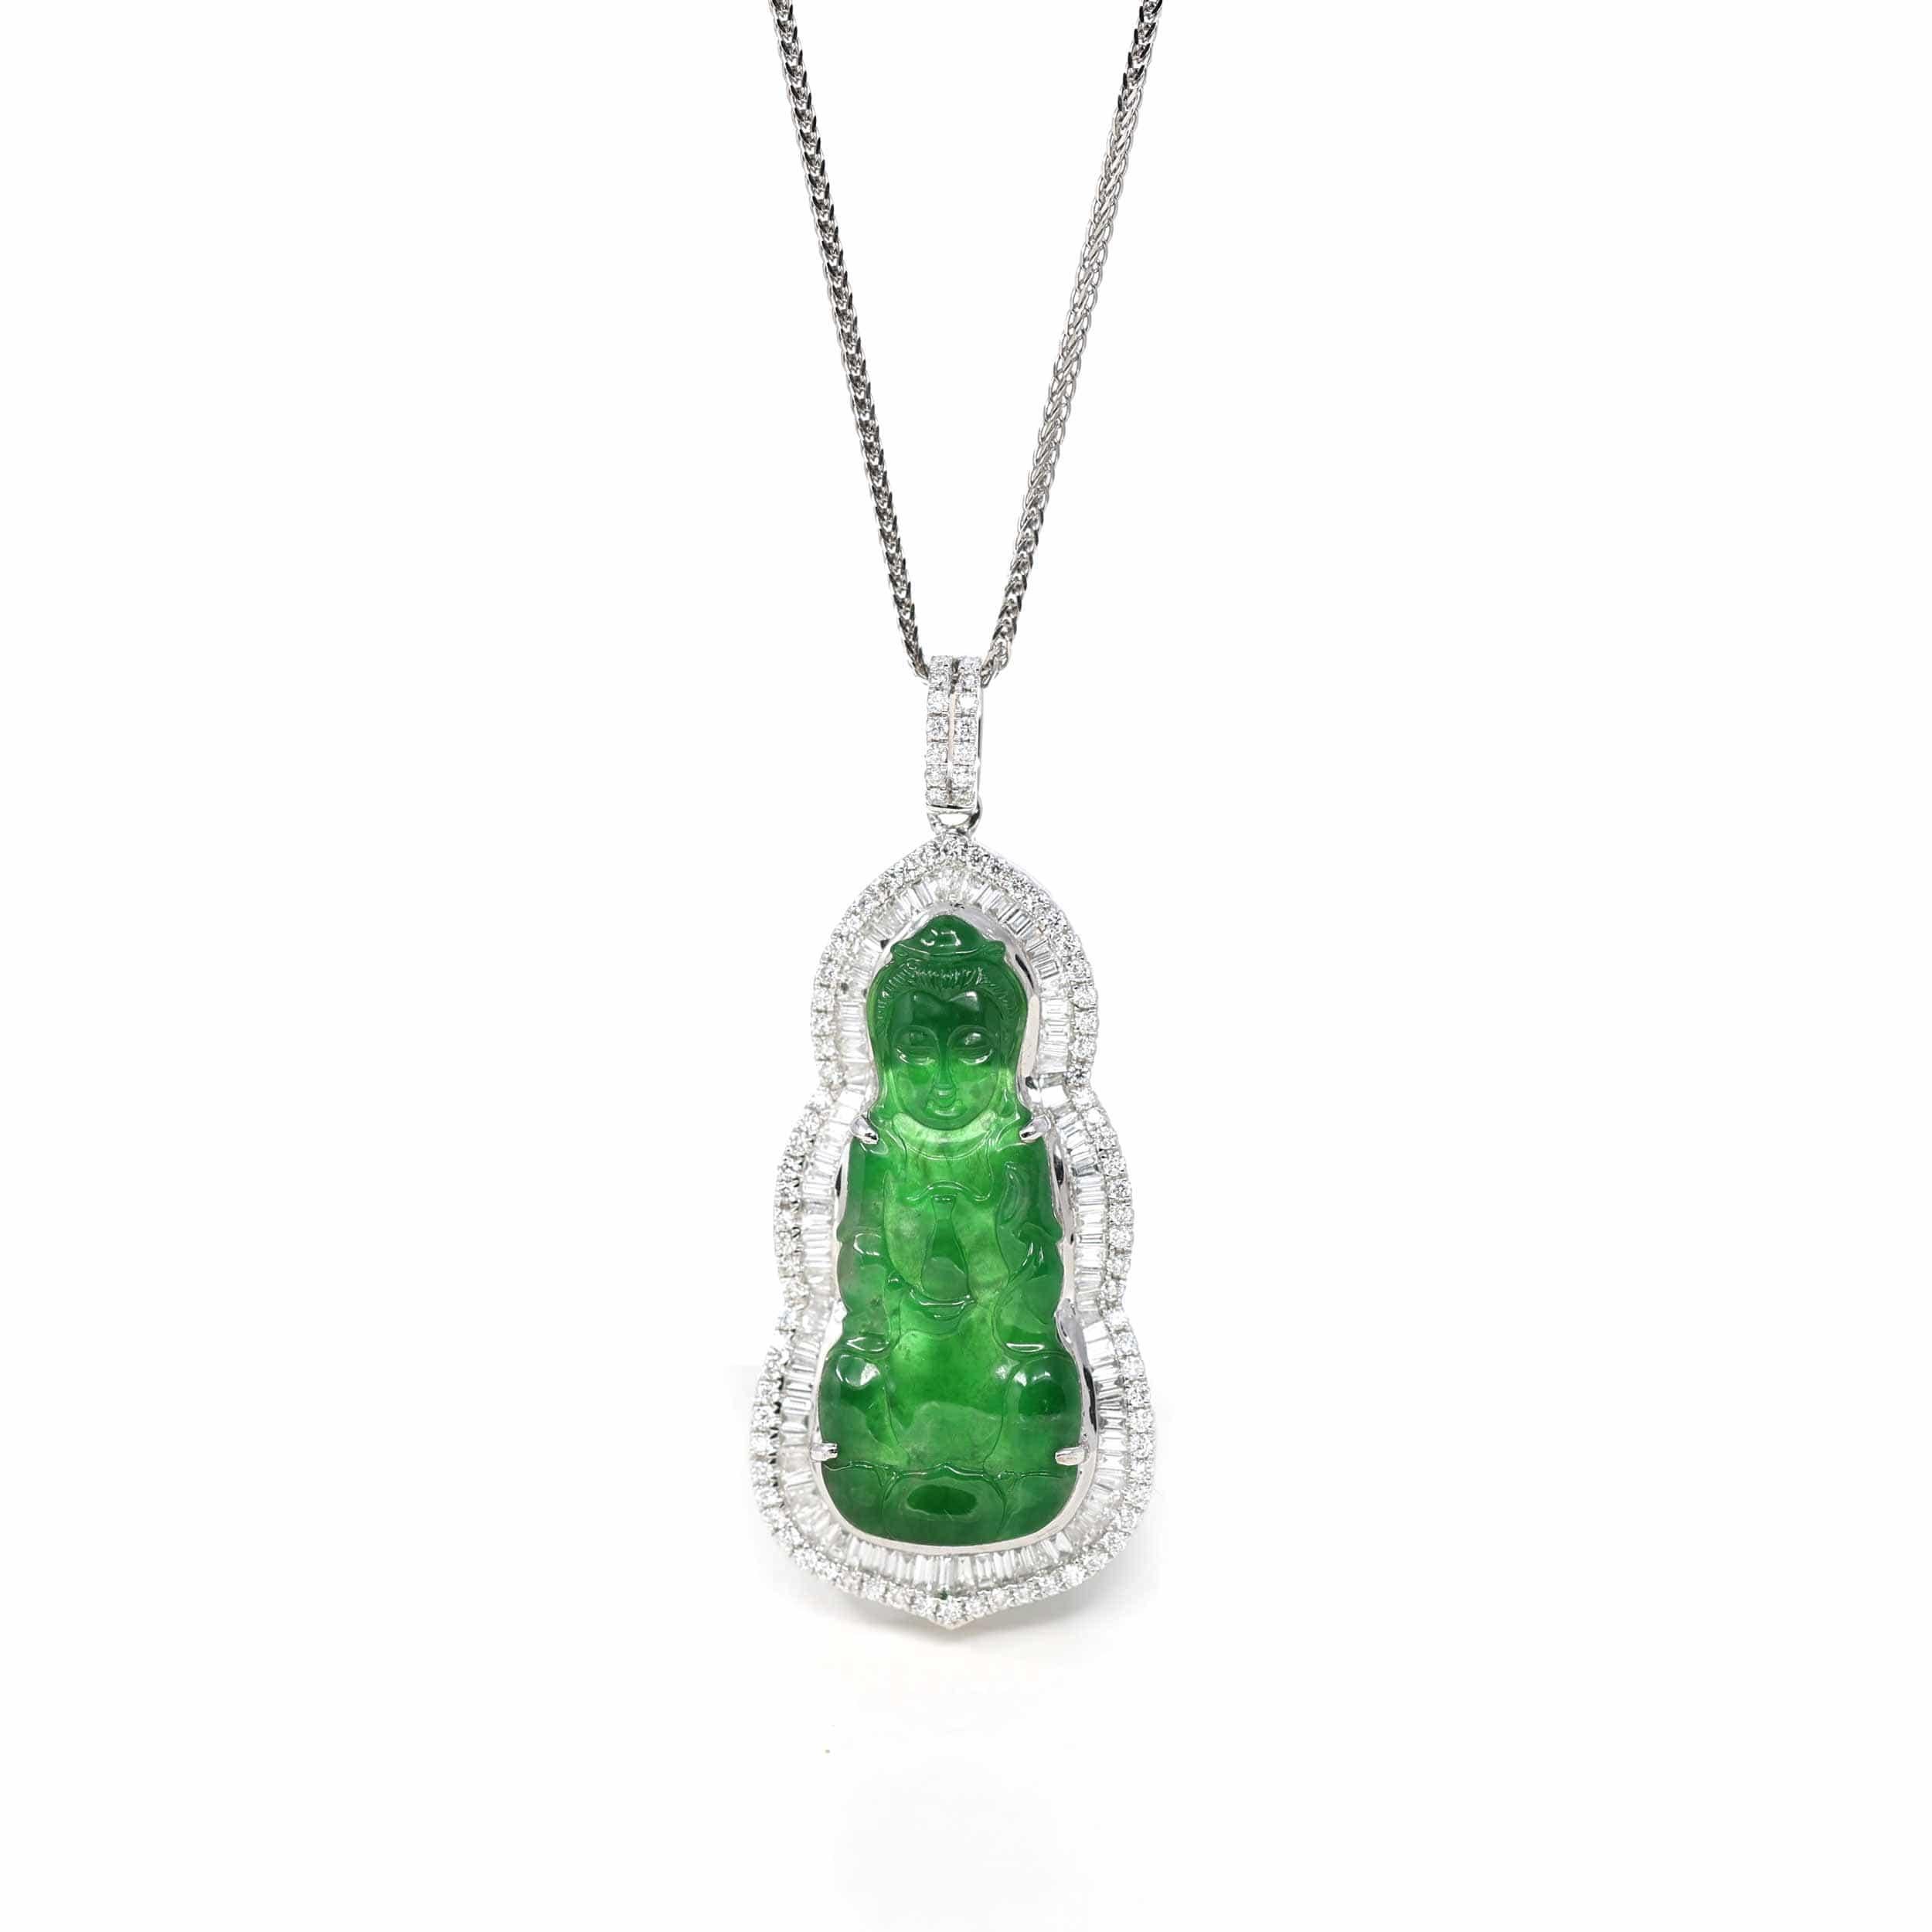 * DESIGN CONCEPT--- This necklace depicts a timeless symbol seen in jade. The Guan Yin. Representing compassion, kindness, and Mercy. The value of the piece comes from the natural Burmese imperial green jadeite jade. As photographed, the